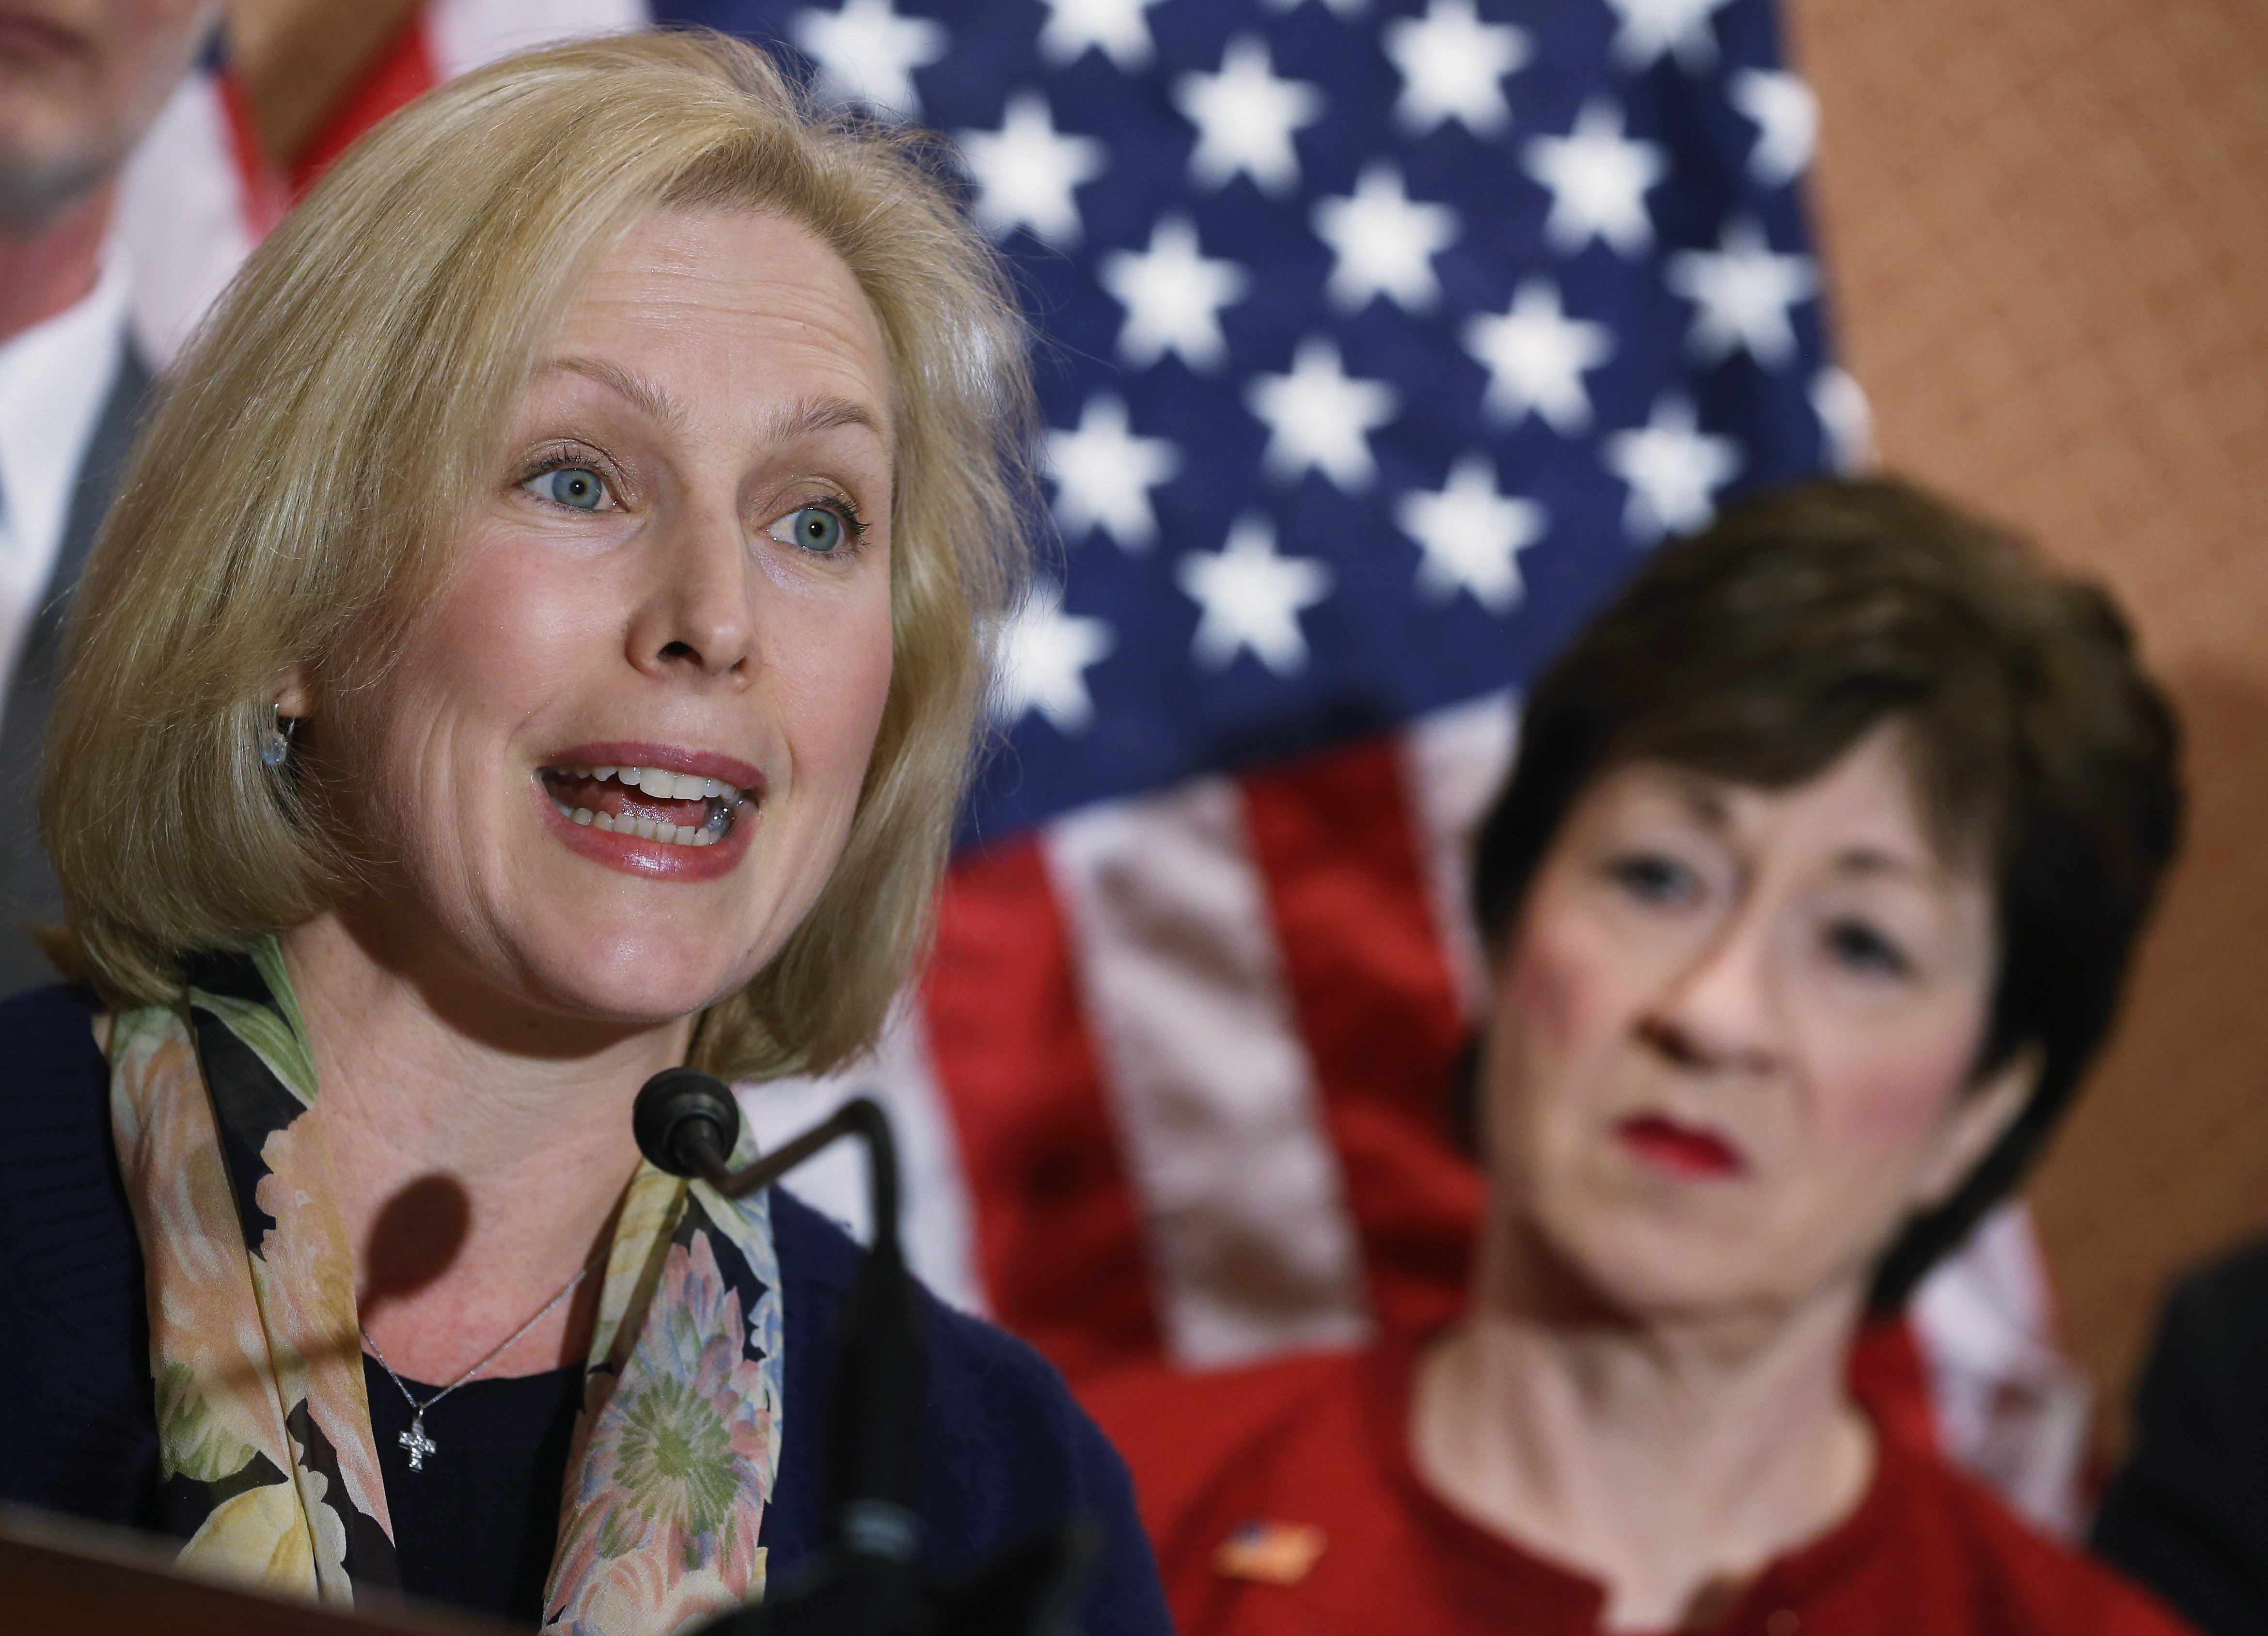 New York Sen. Kirsten Gillibrand speaks while Maine Sen. Susan Collins (R-ME) listens during a news conference on changing the military justice system, on Dec. 2, 2014 in Washington, D.C. (Mark Wilson/Getty Images)